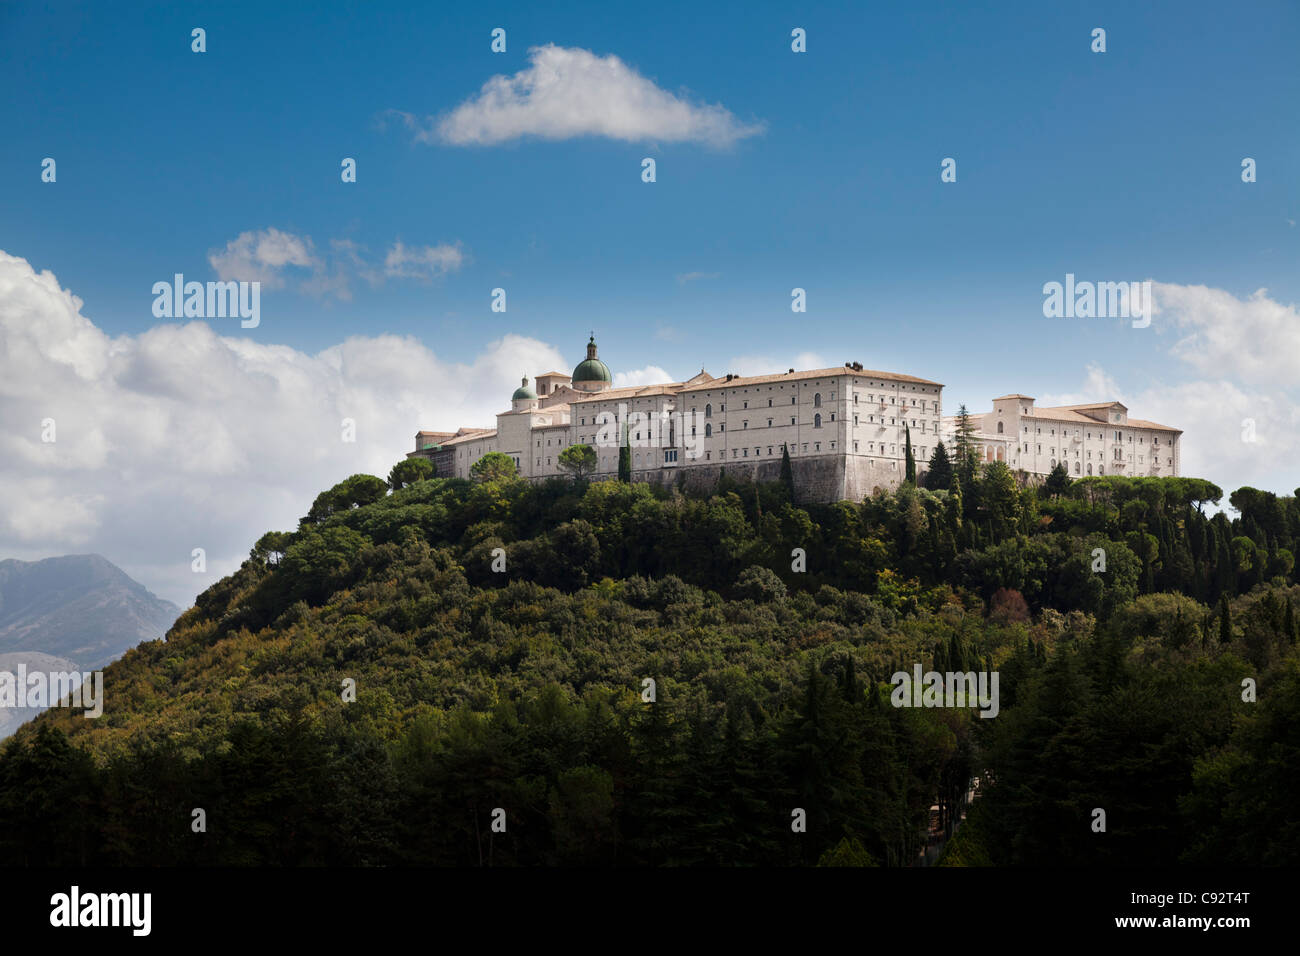 The rebuilt Monte Cassino abbey on top of the mountain in Italy. Stock Photo